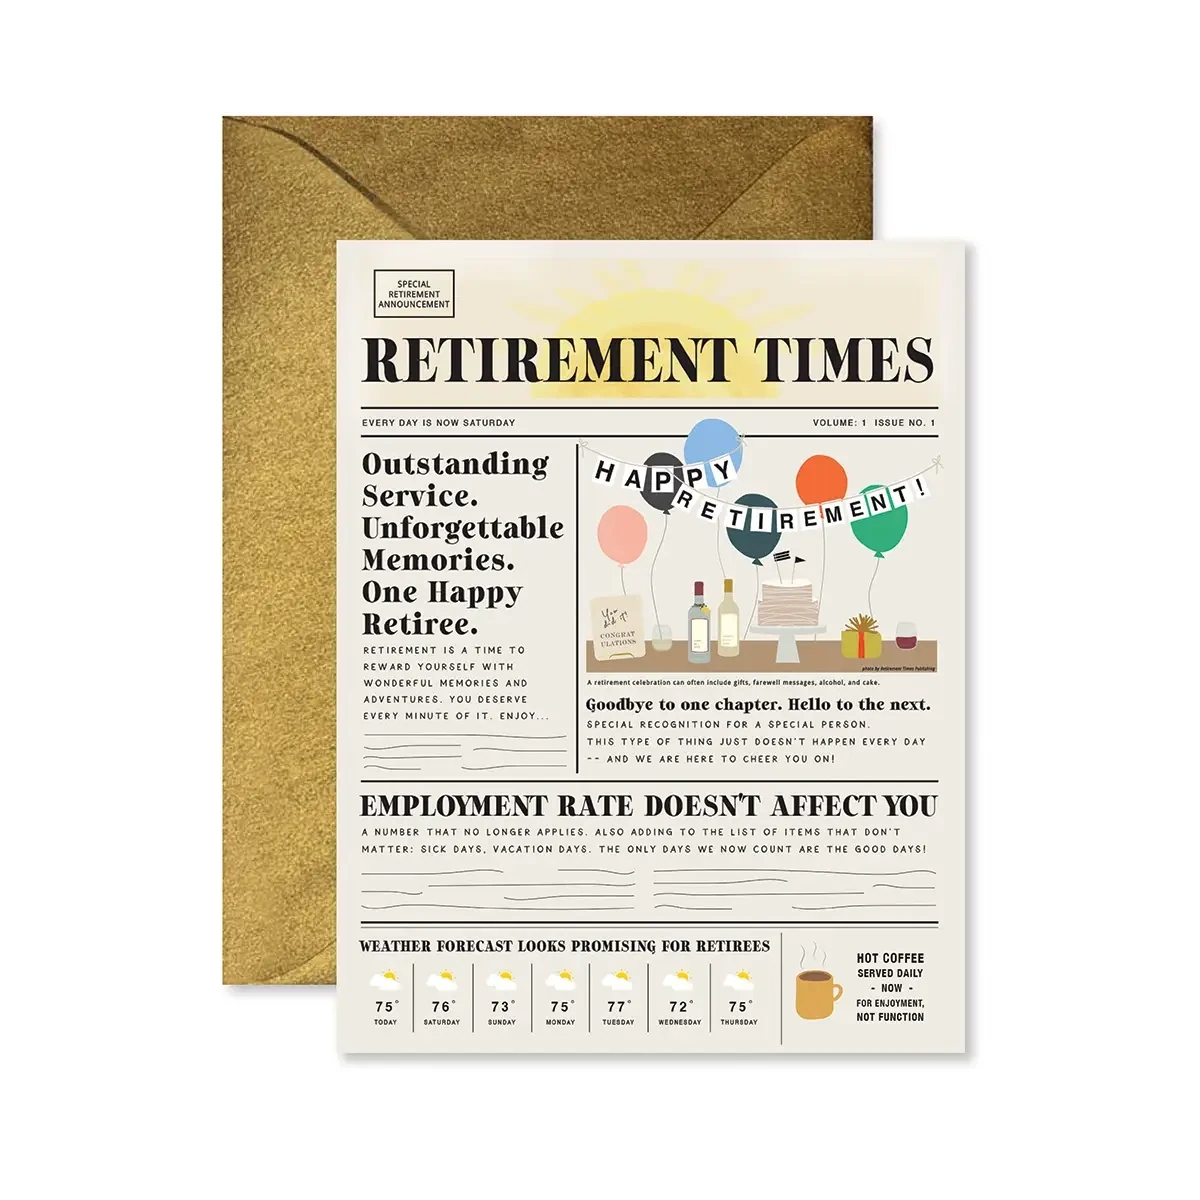 Retirement Times Card